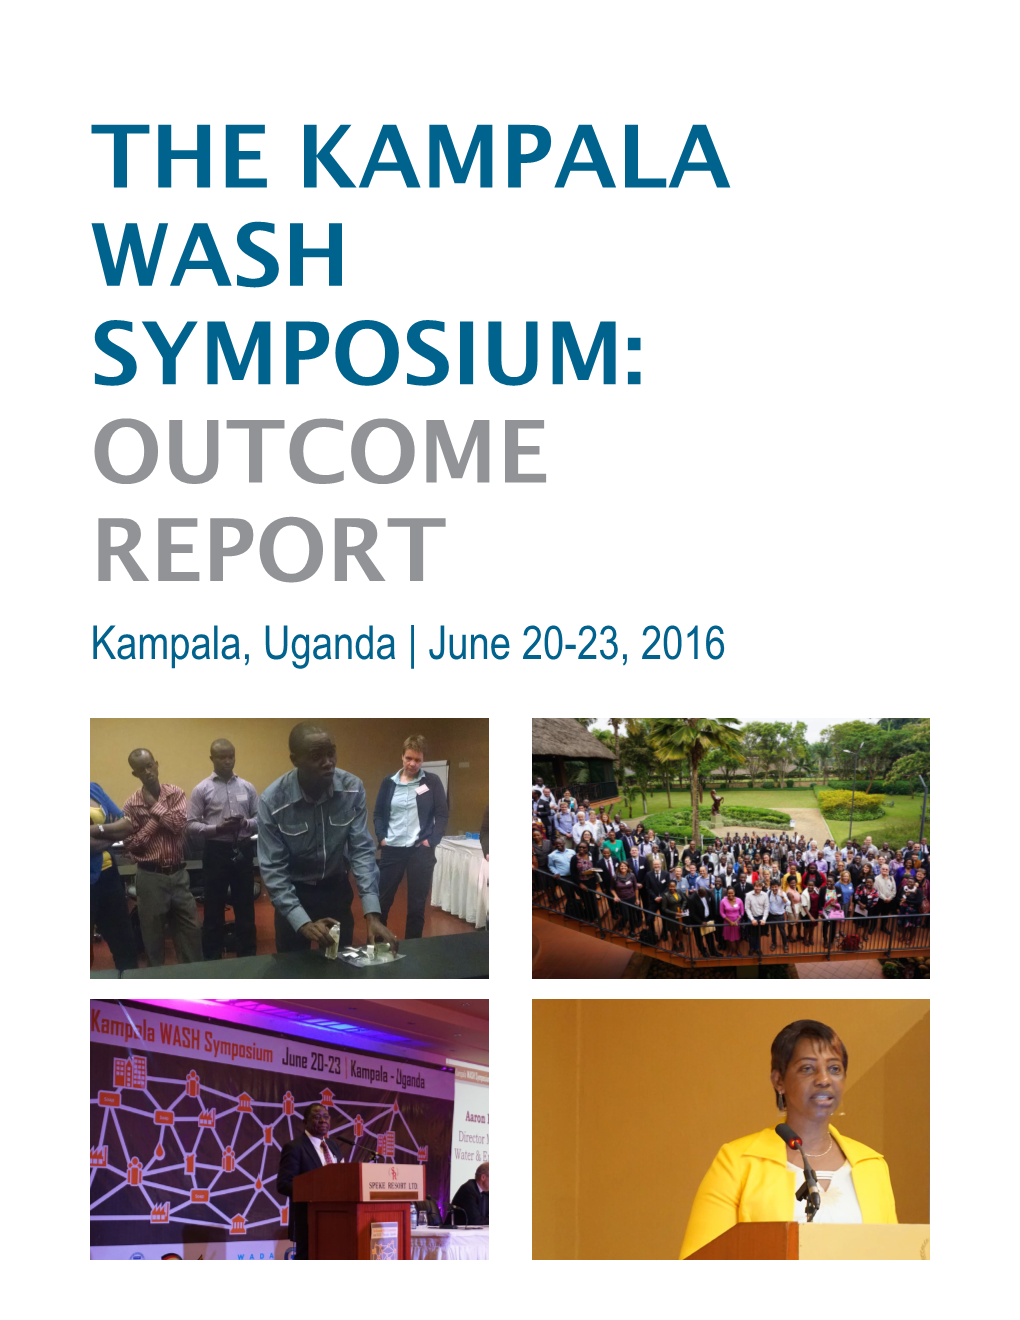 KAMPALA WASH SYMPOSIUM: OUTCOME REPORT Kampala, Uganda | June 20-23, 2016 the Kampala WASH Symposium and the Development of This Report Have Been Supported By